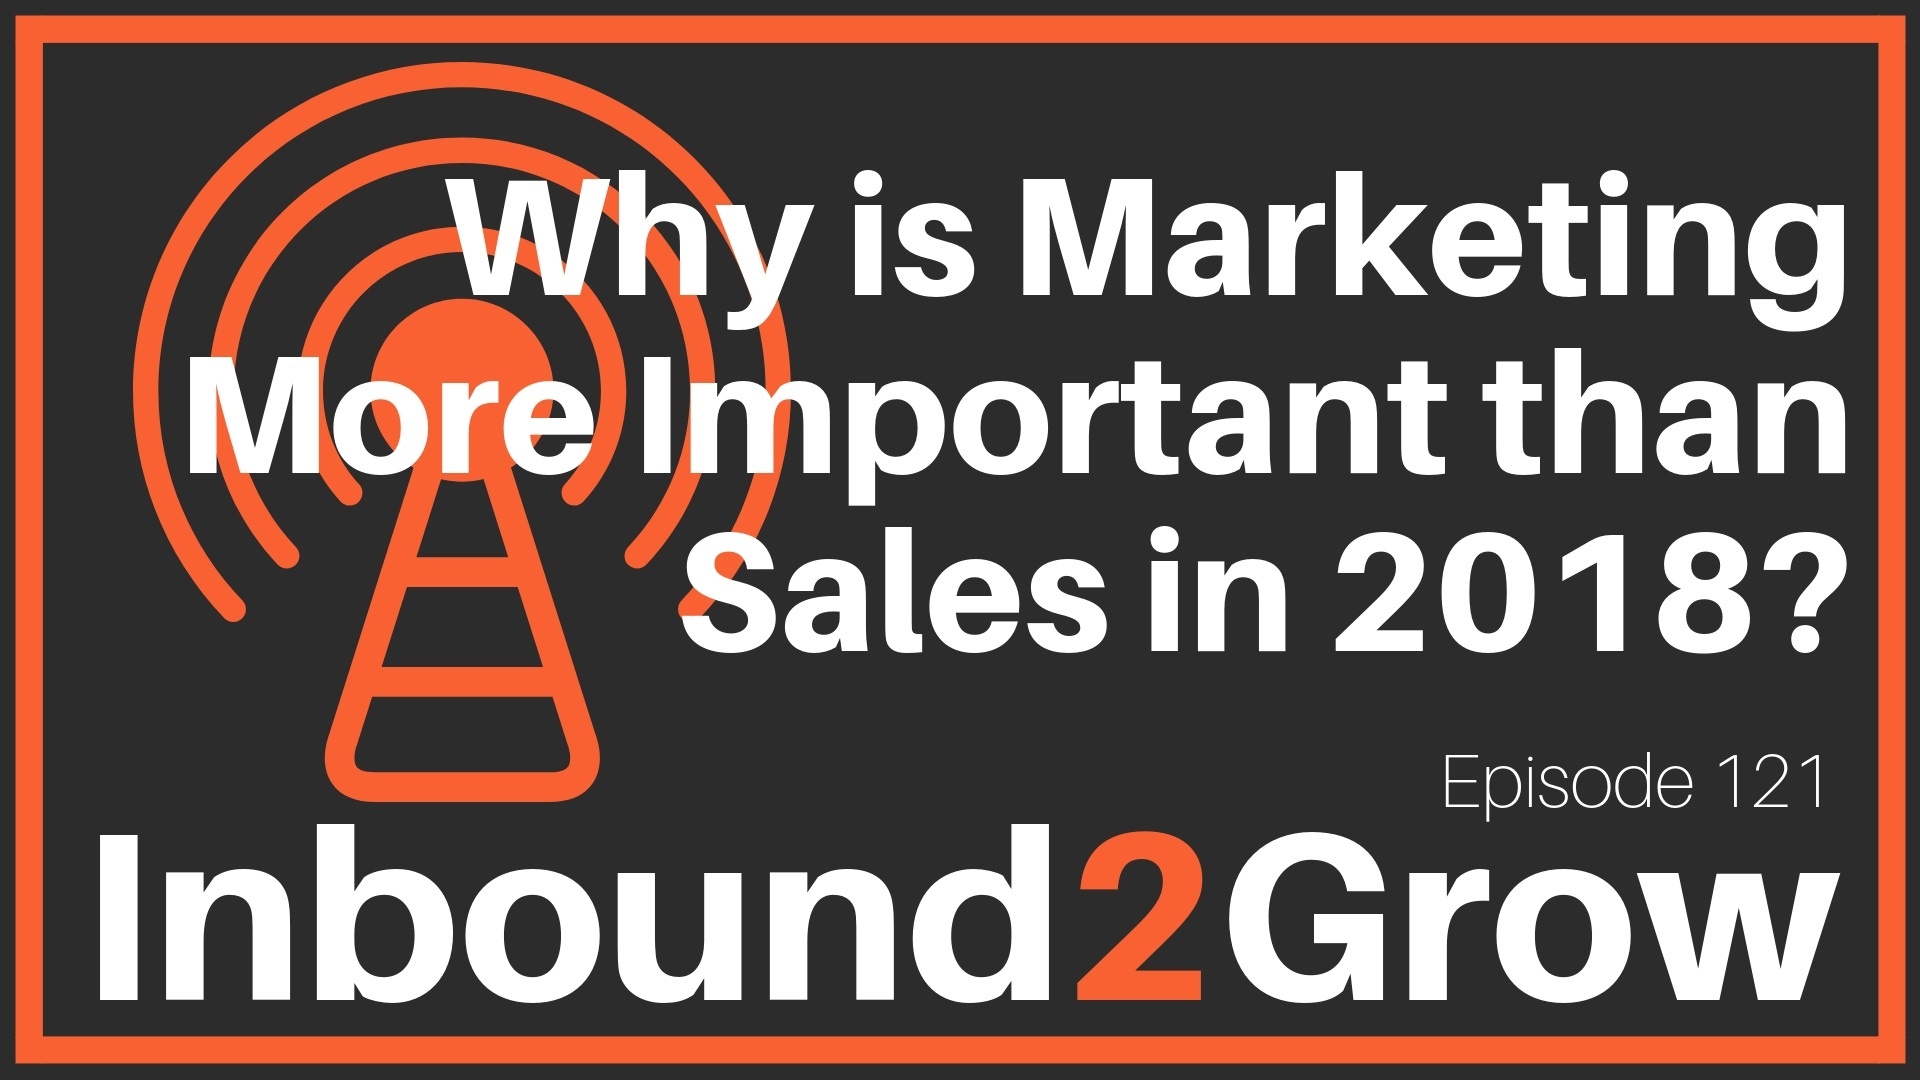 Episode 121: Why is Marketing More Important than Sales in 2018?